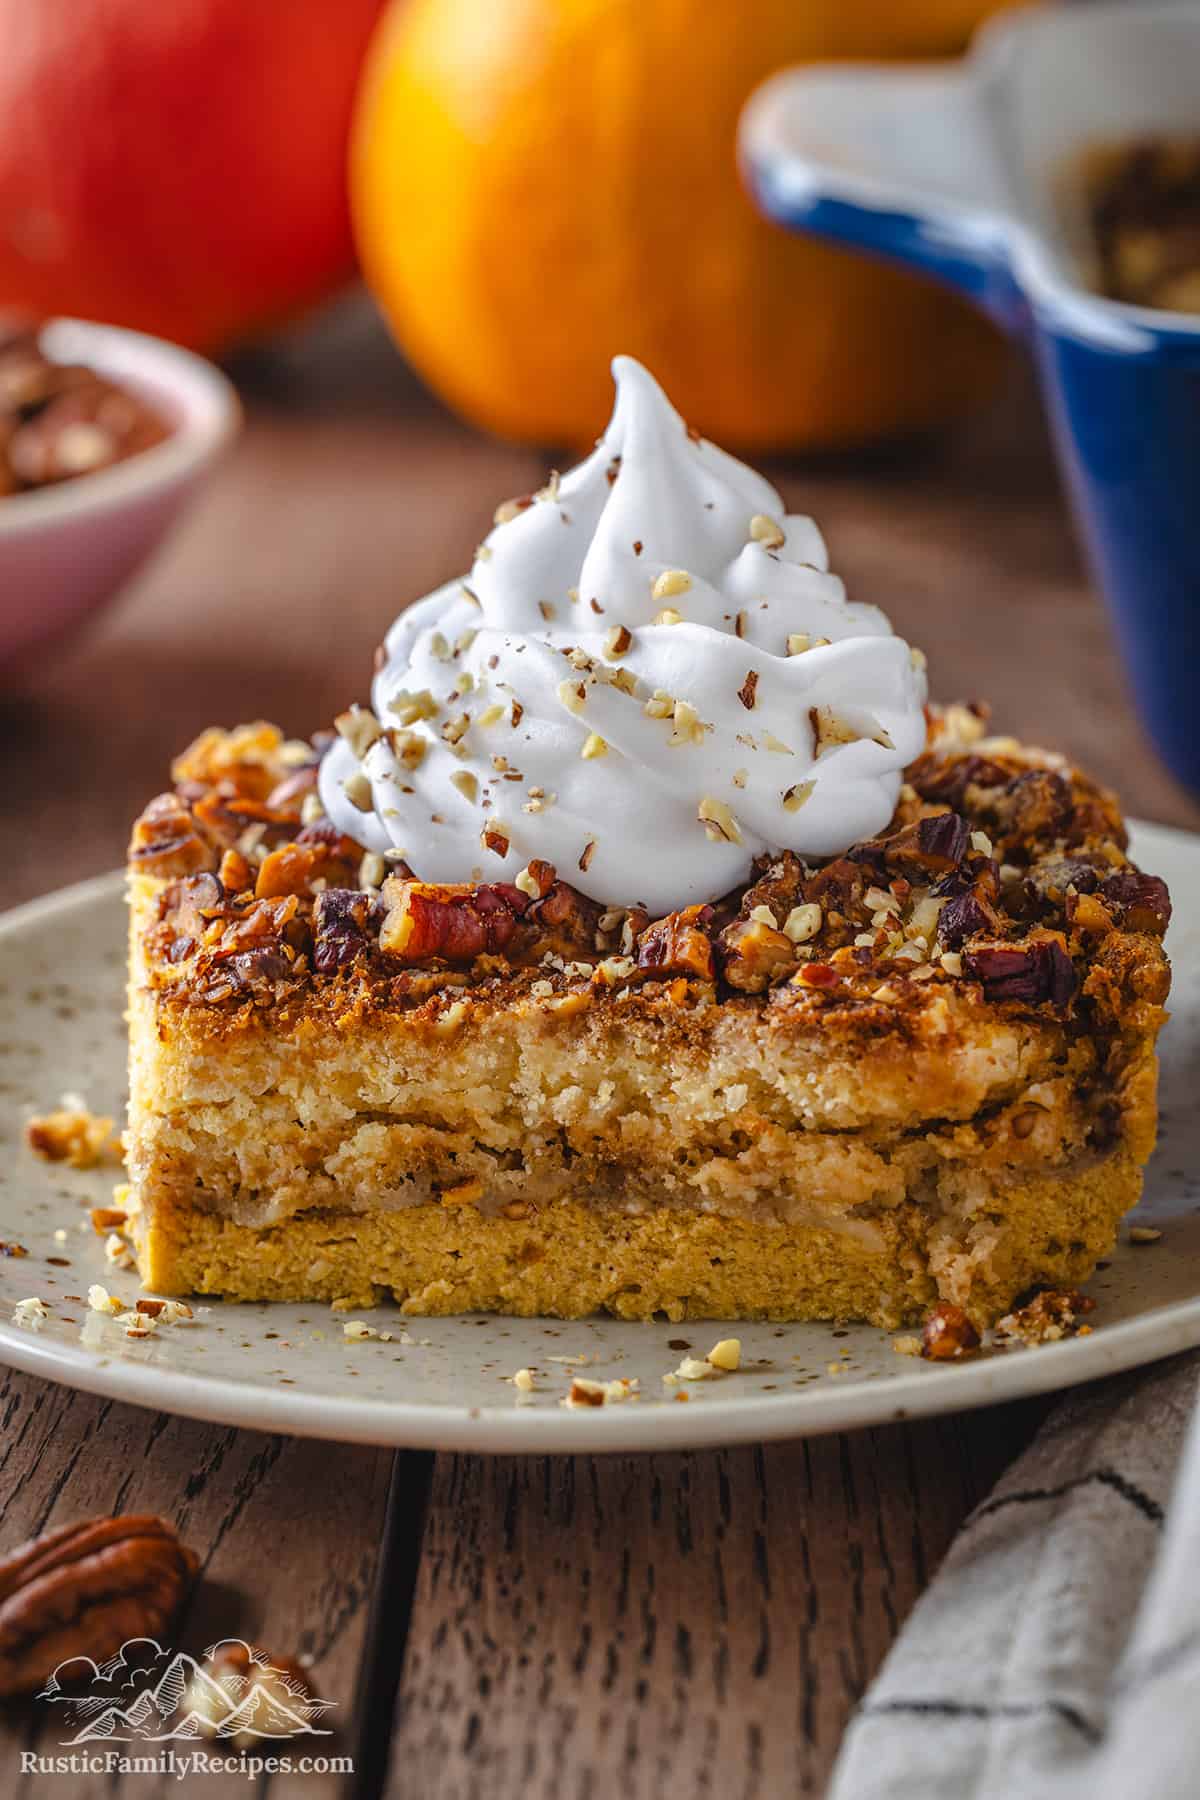 Slice of pumpkin crunch cake topped with whipped cream.